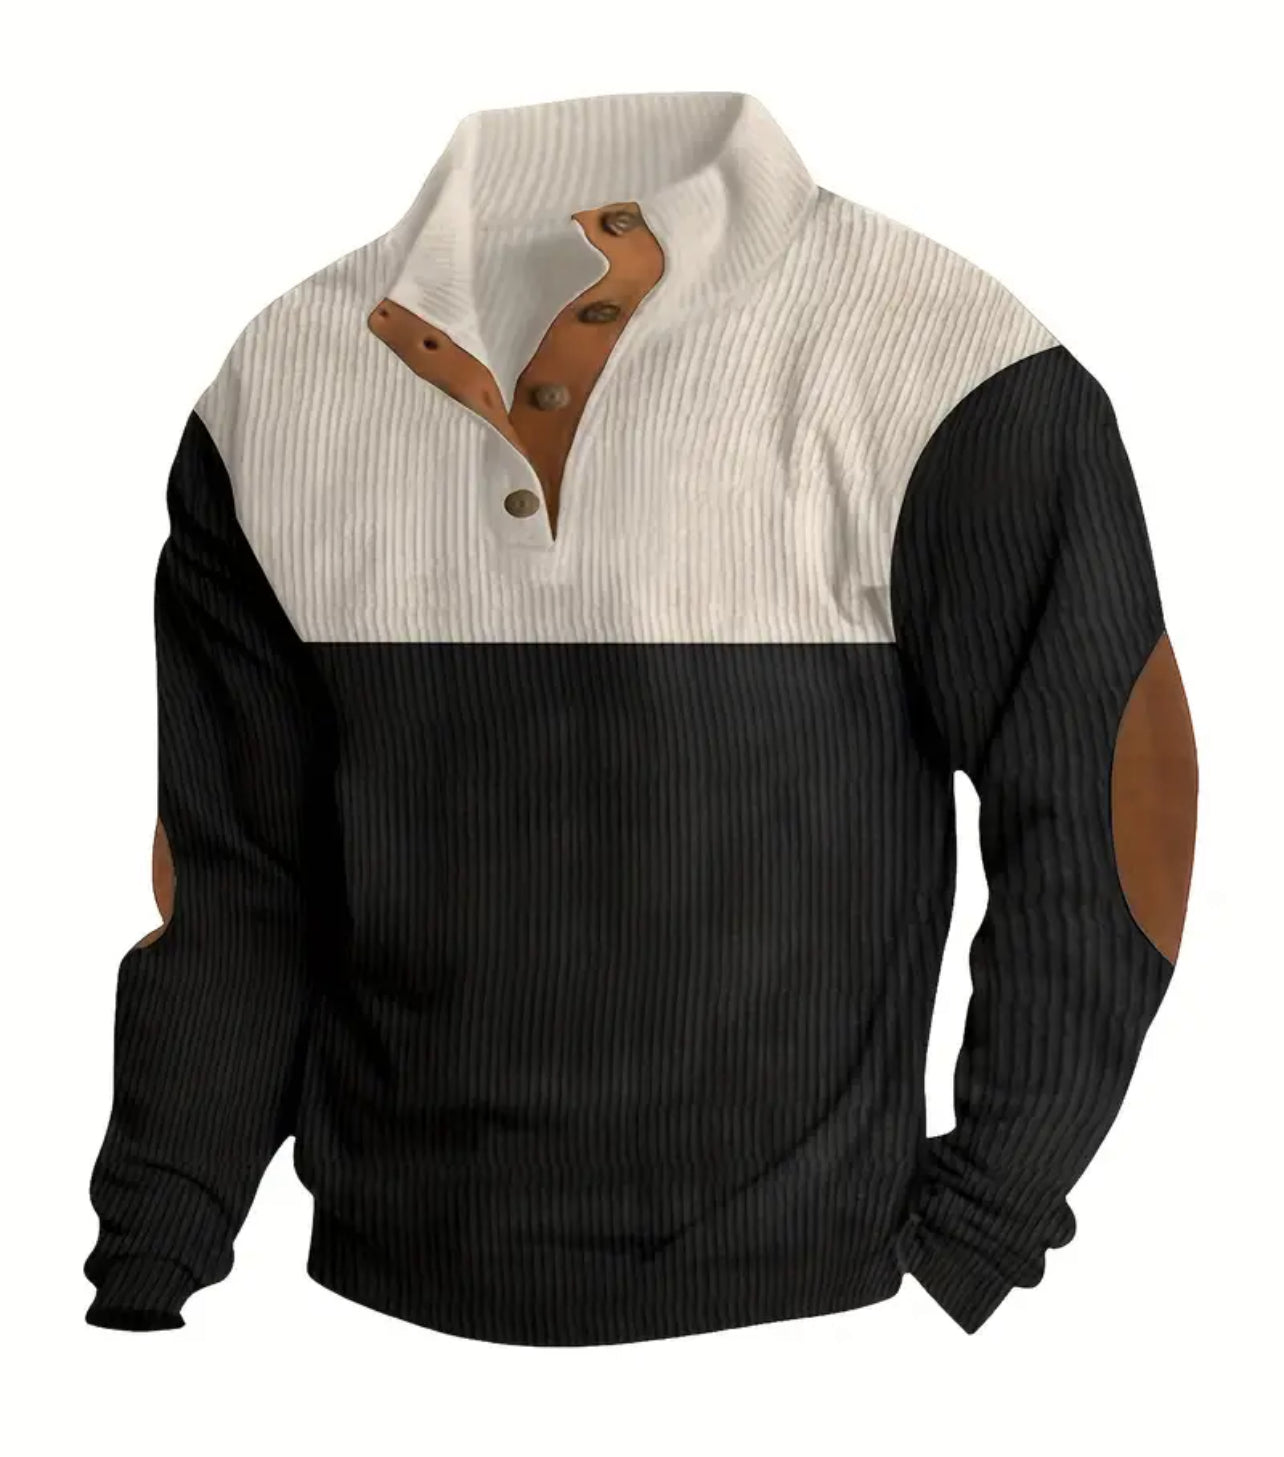 Retro Color Block Knitted Ribbed Sweater, Men's Casual Warm Mid Stretch Stand Collar Pullover, Sugar Daddy 🎩 Collection